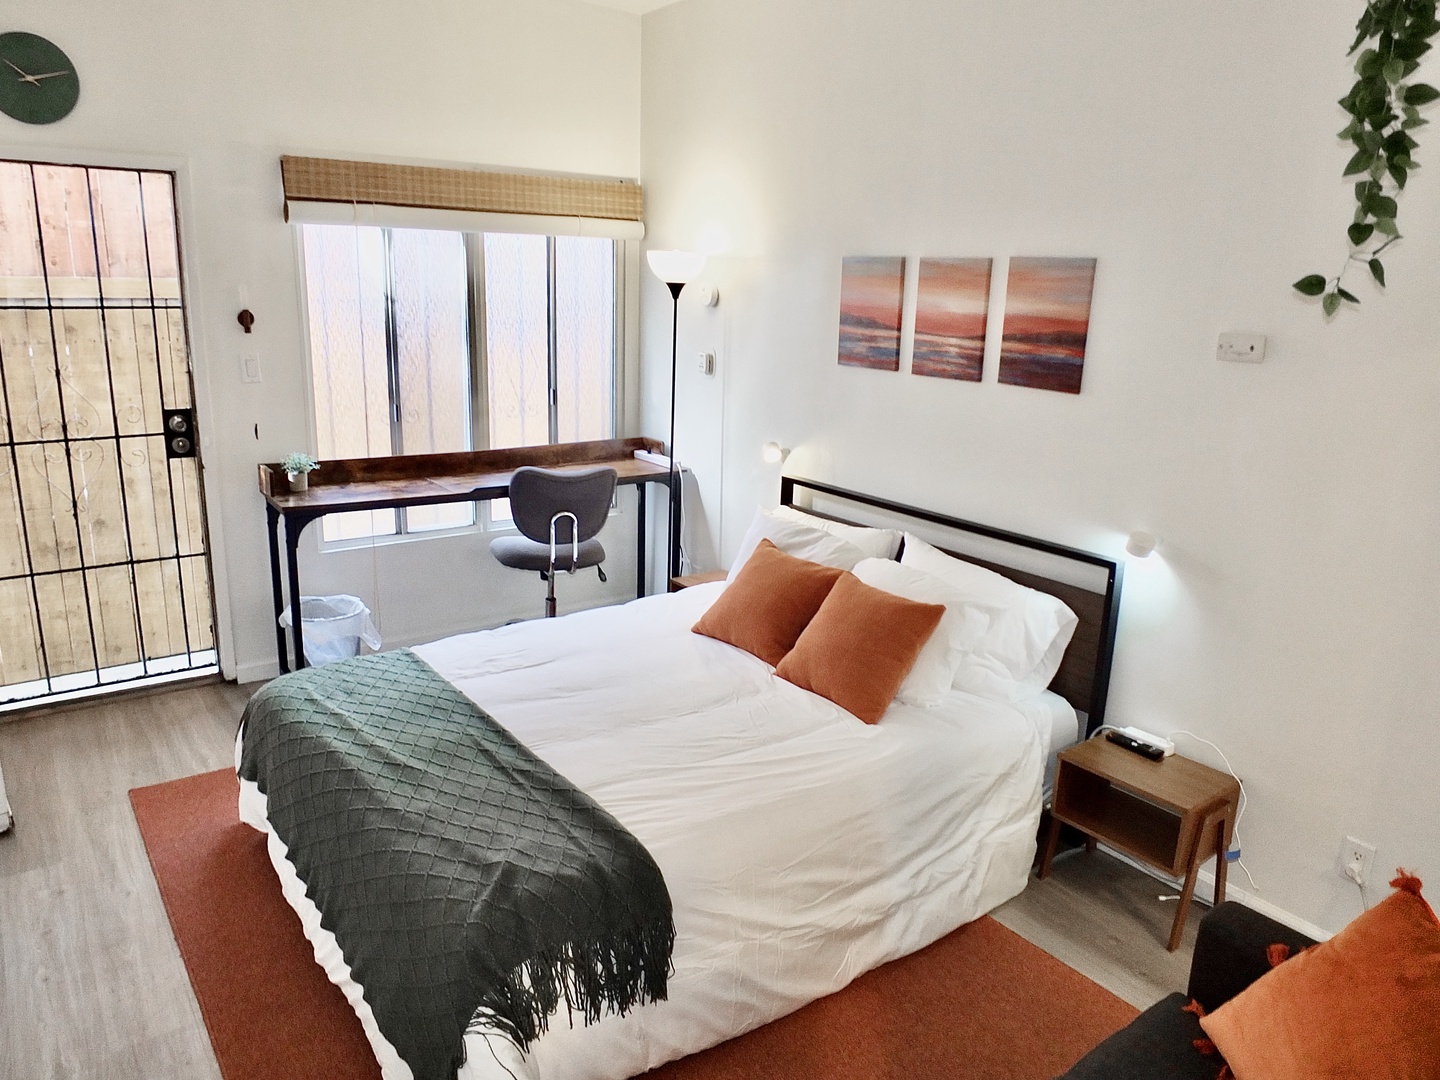 This comfy studio apartment offers a queen bed, Smart TV, & full kitchen